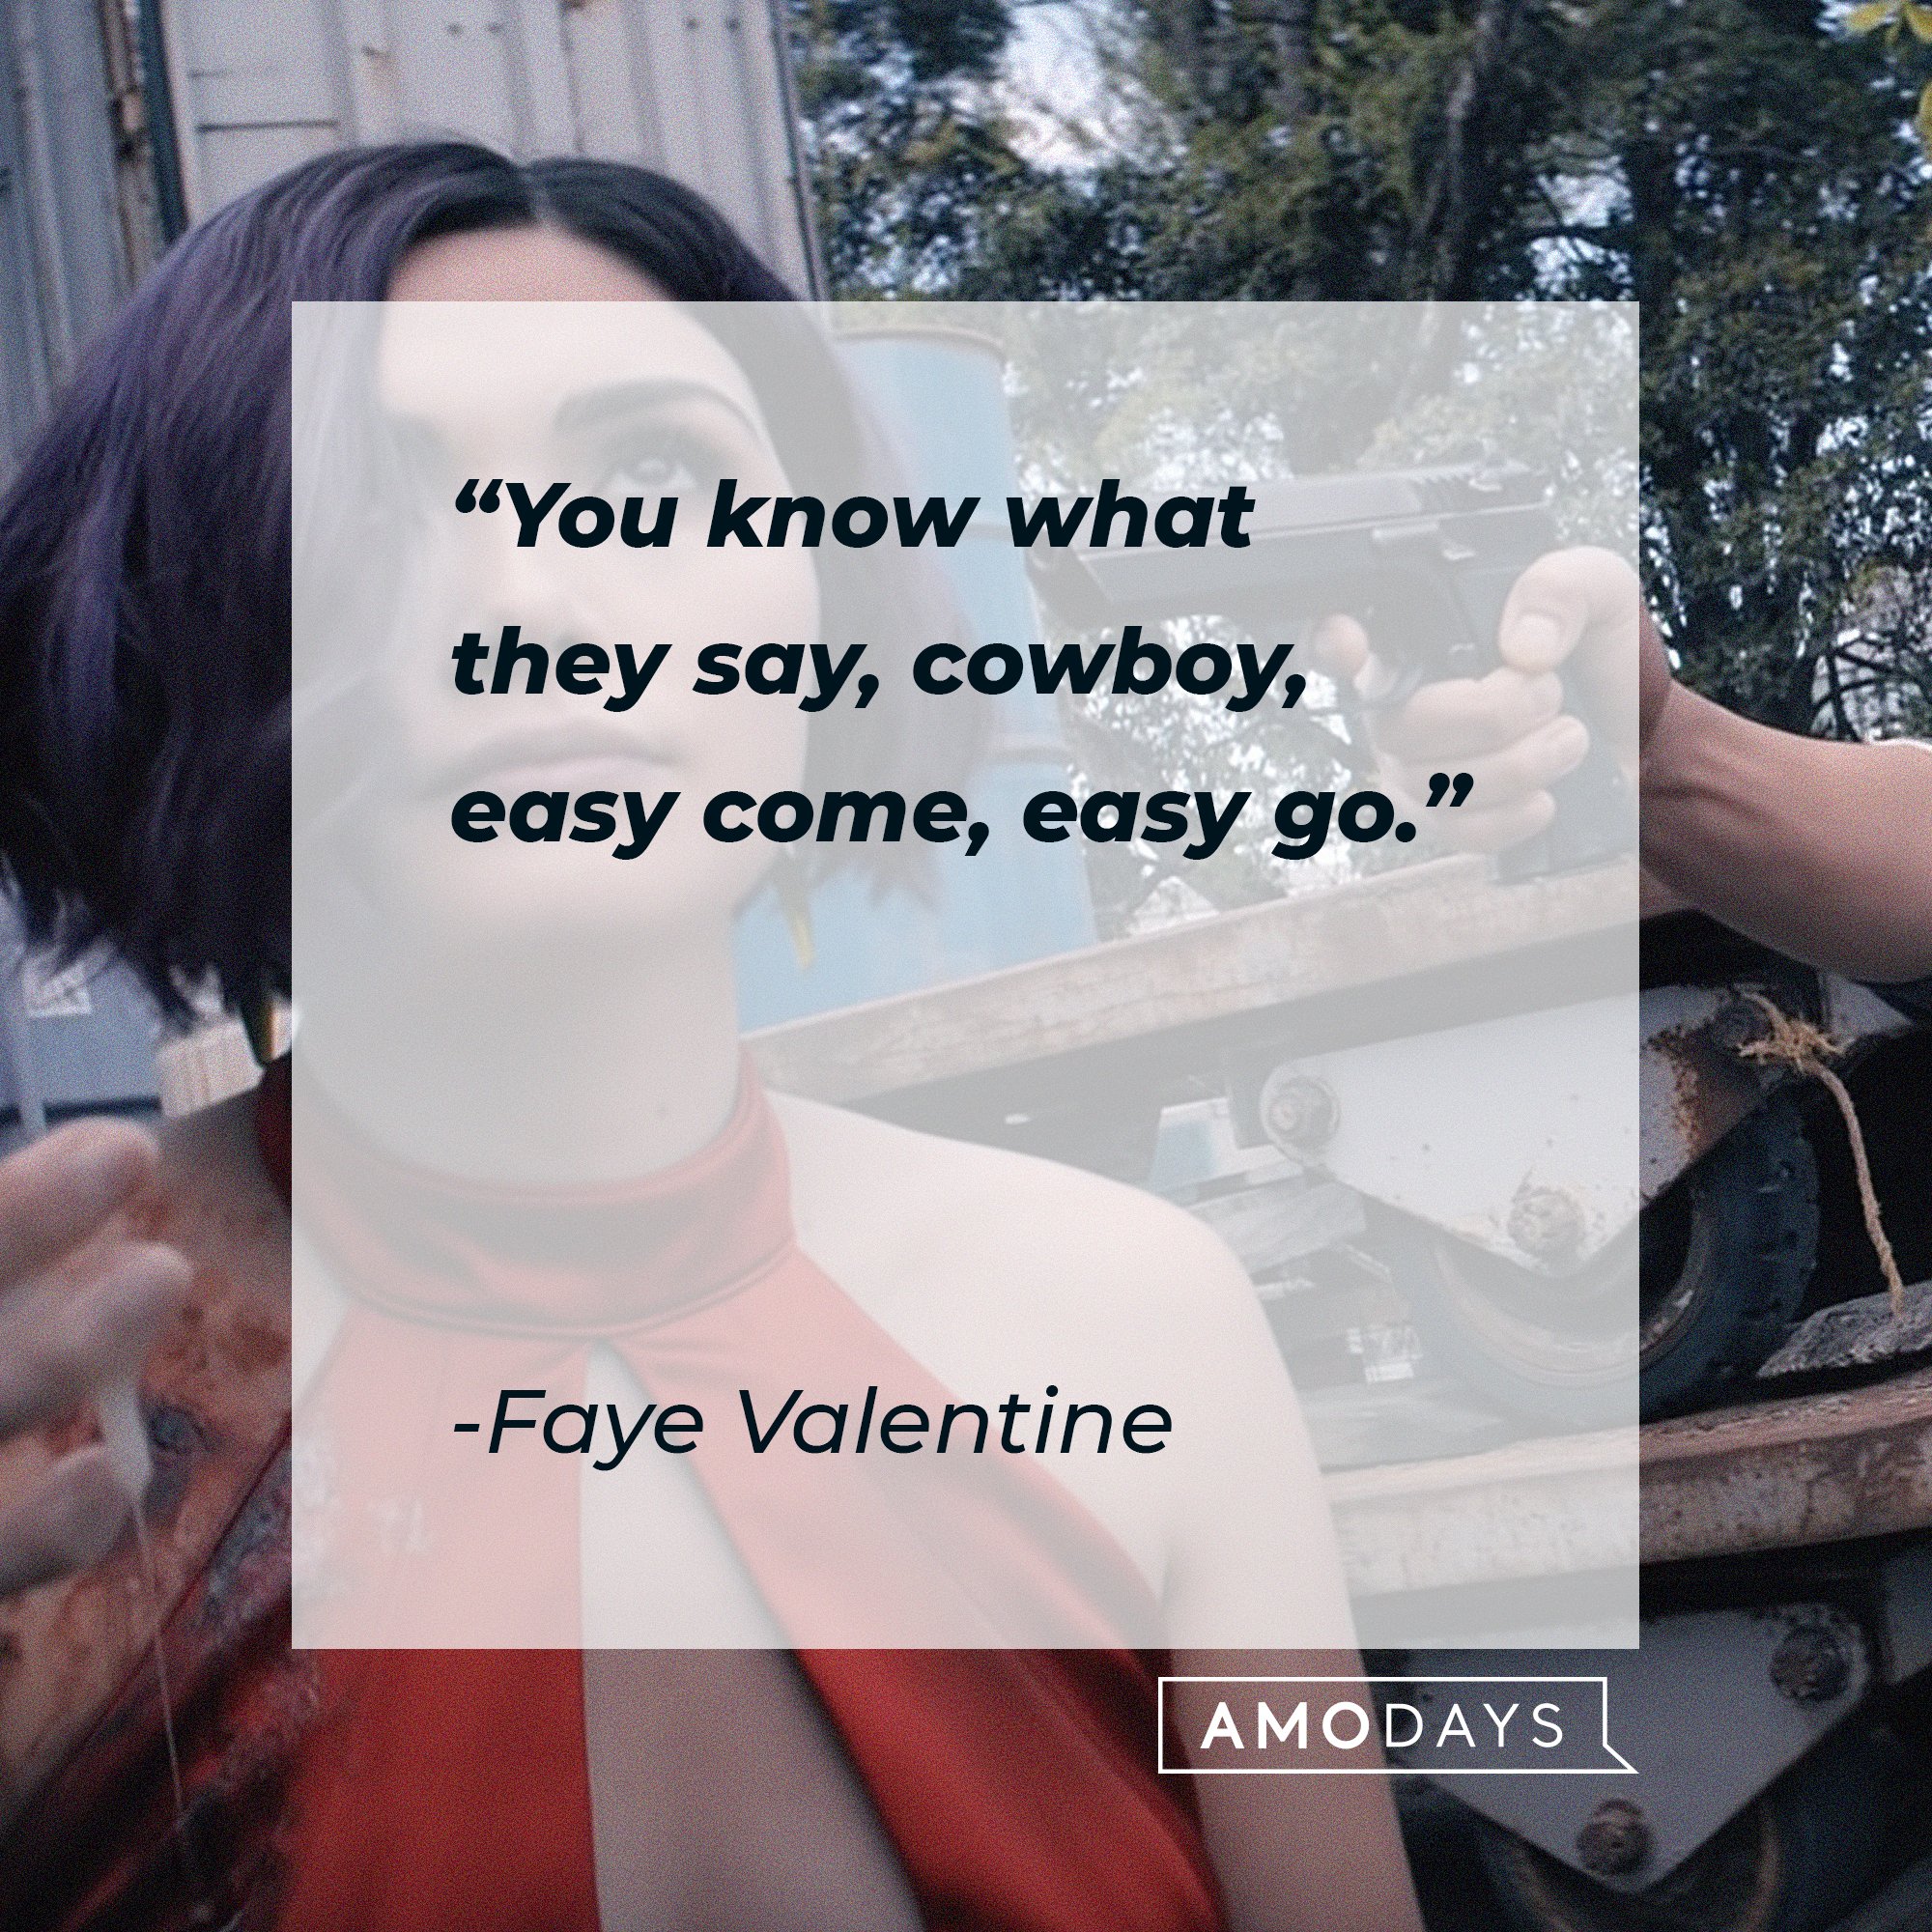  Faye Valentine's quote: "You know what they say, cowboy, easy come, easy go." | Image: AmoDays